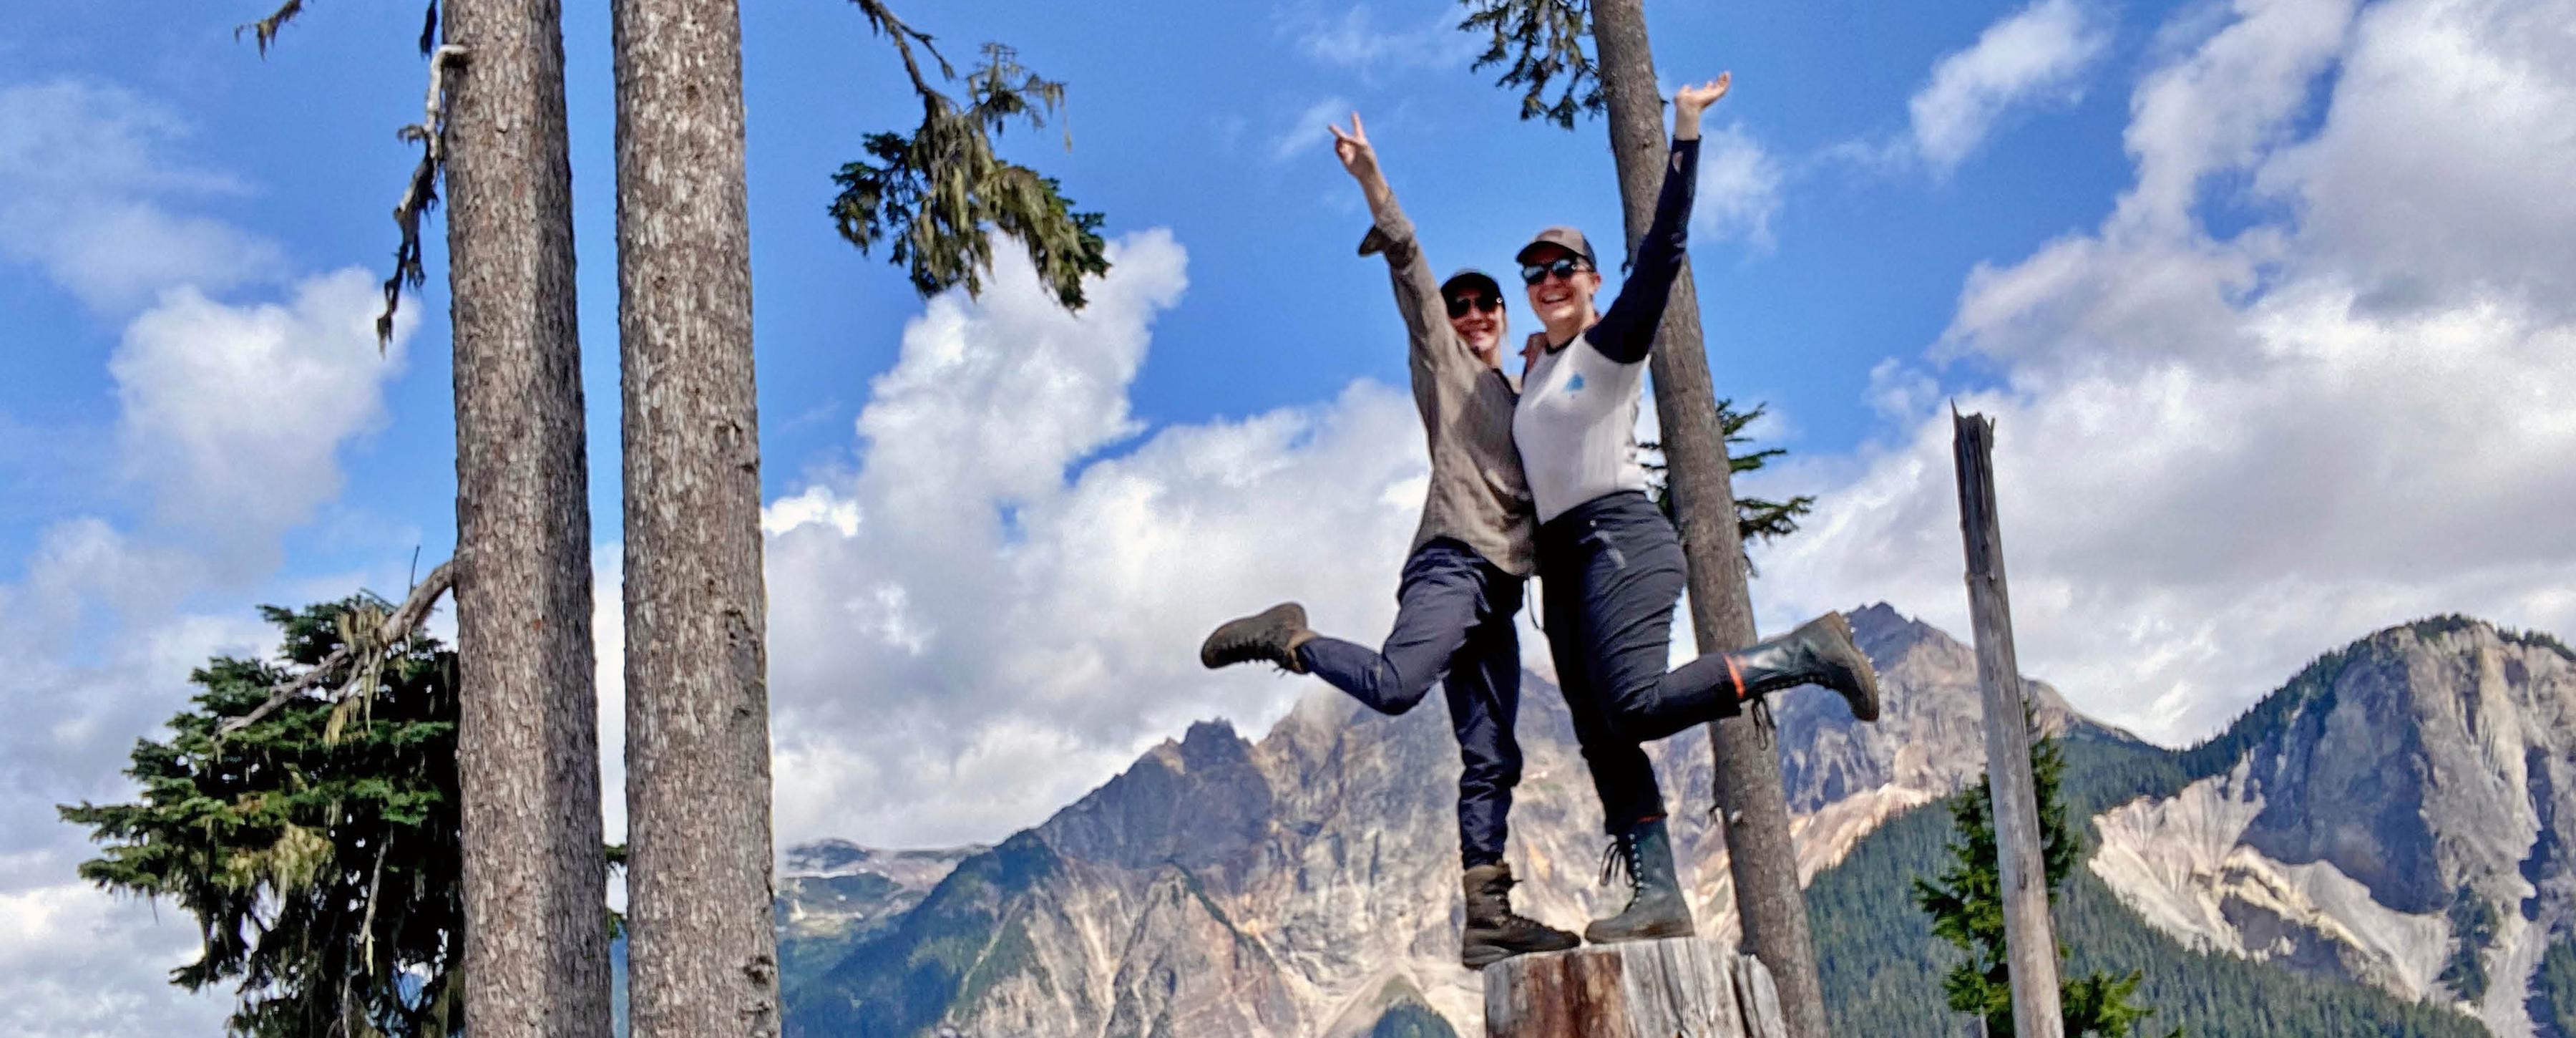 Two students are posing happily on a tree stump, with mountains and forest in the background.